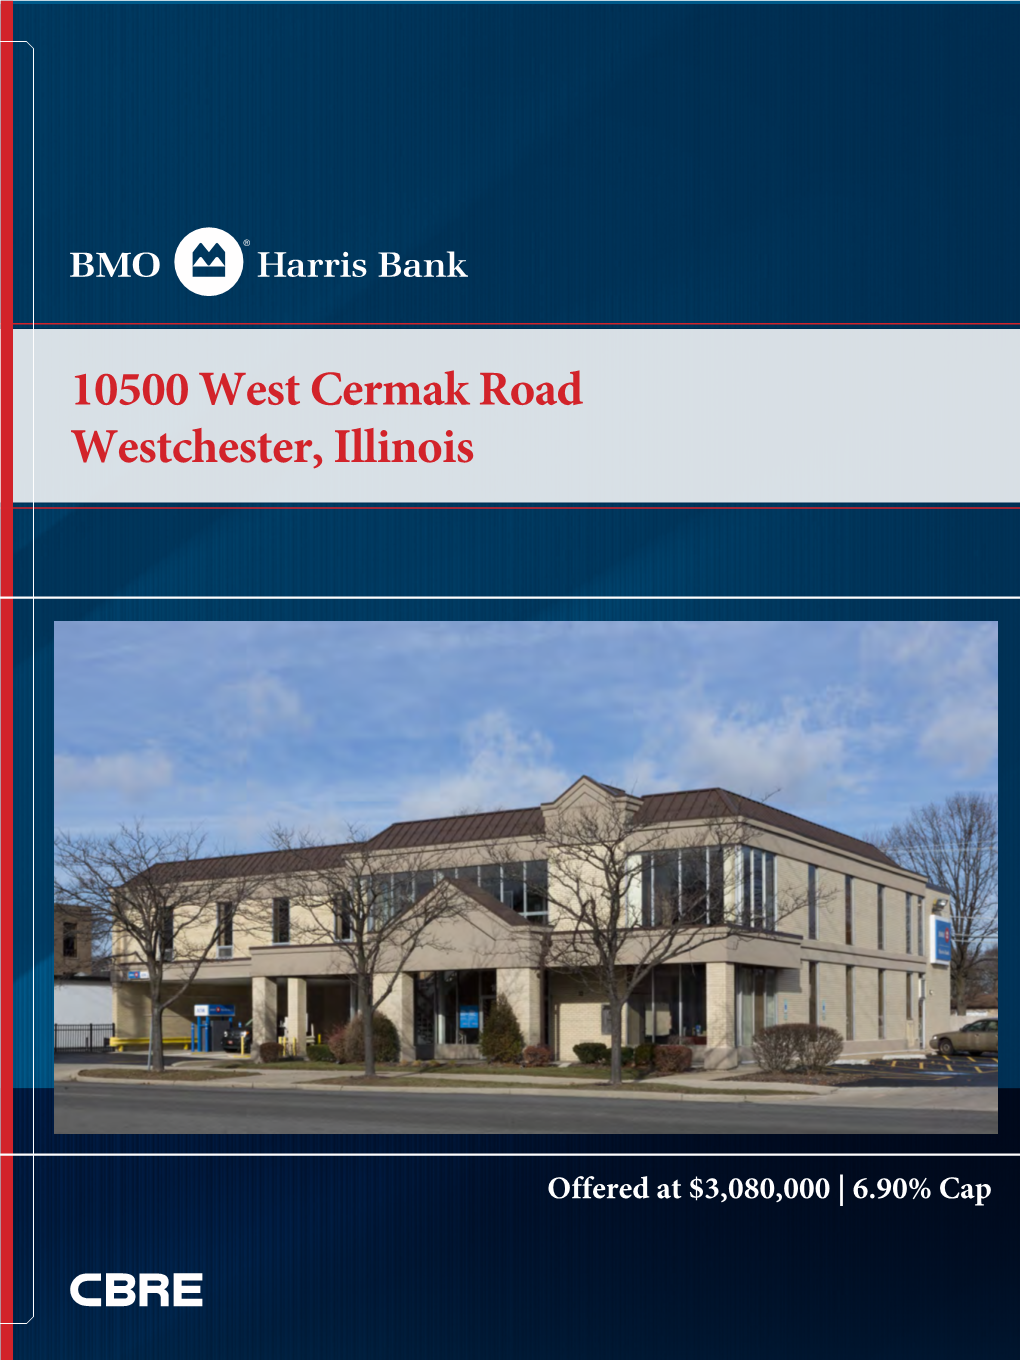 BMO Harris Bank Branch Located at 10500 West Cermak Road in Westchester, Illinois (The "Property")